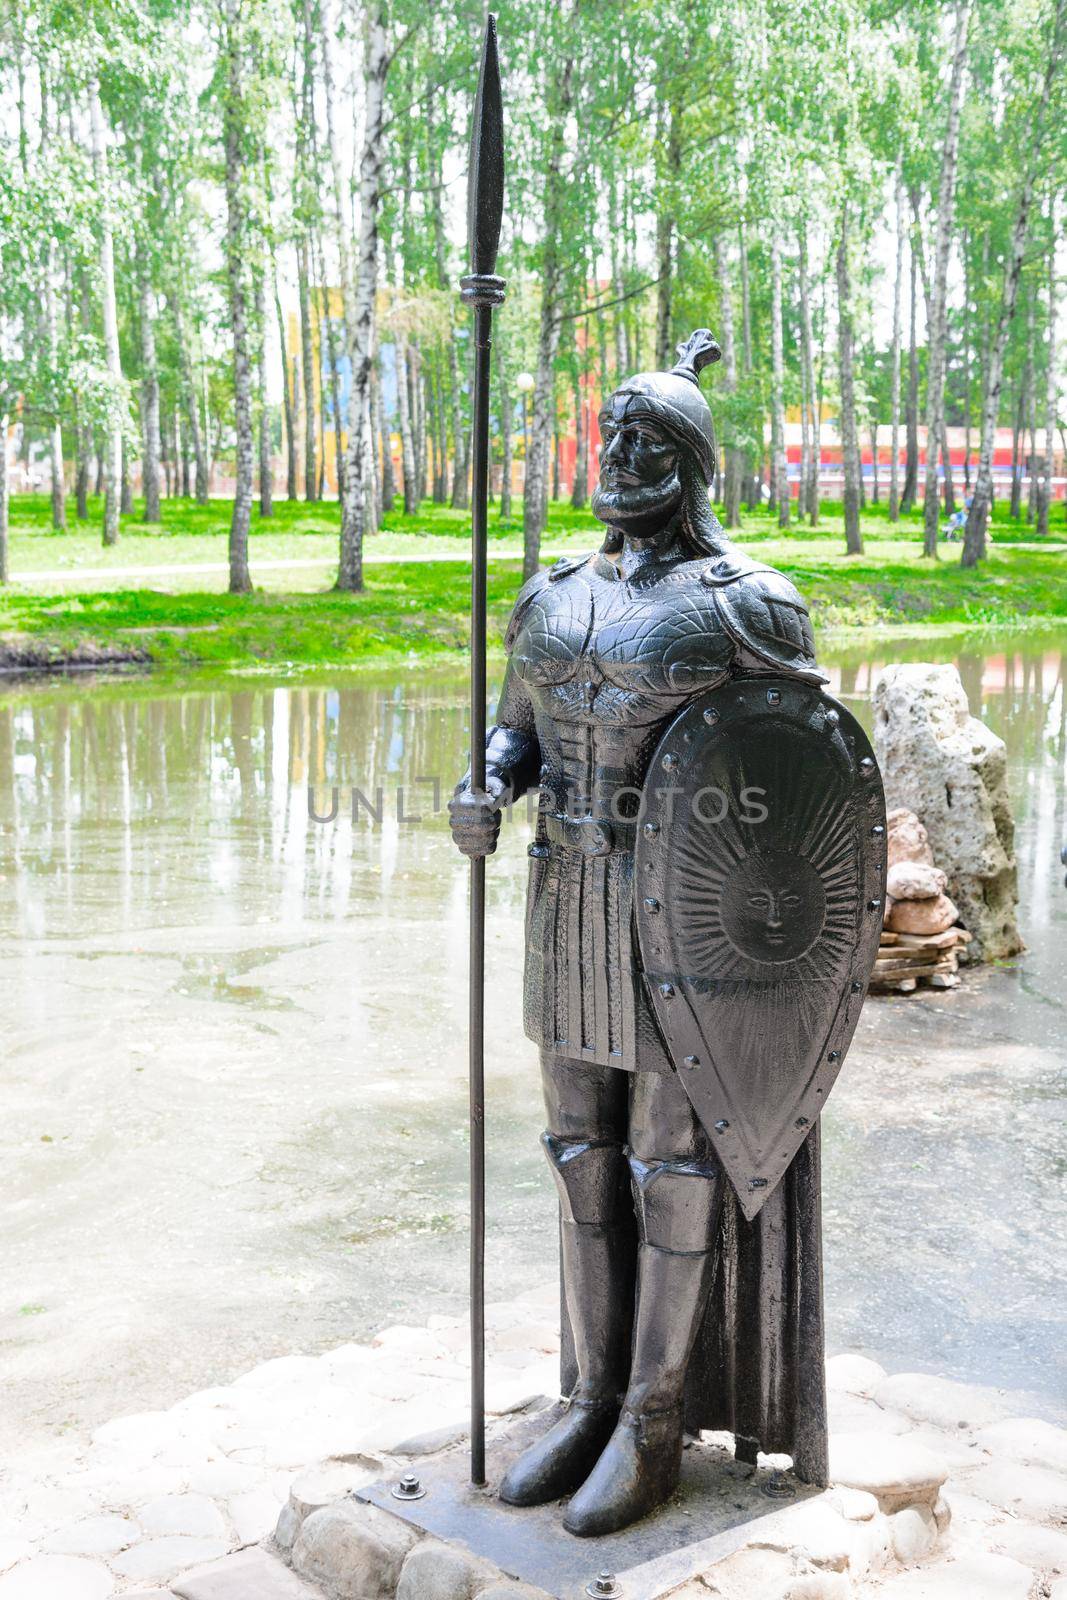 Sculpture black knight with shield and spear cast iron by zartarn